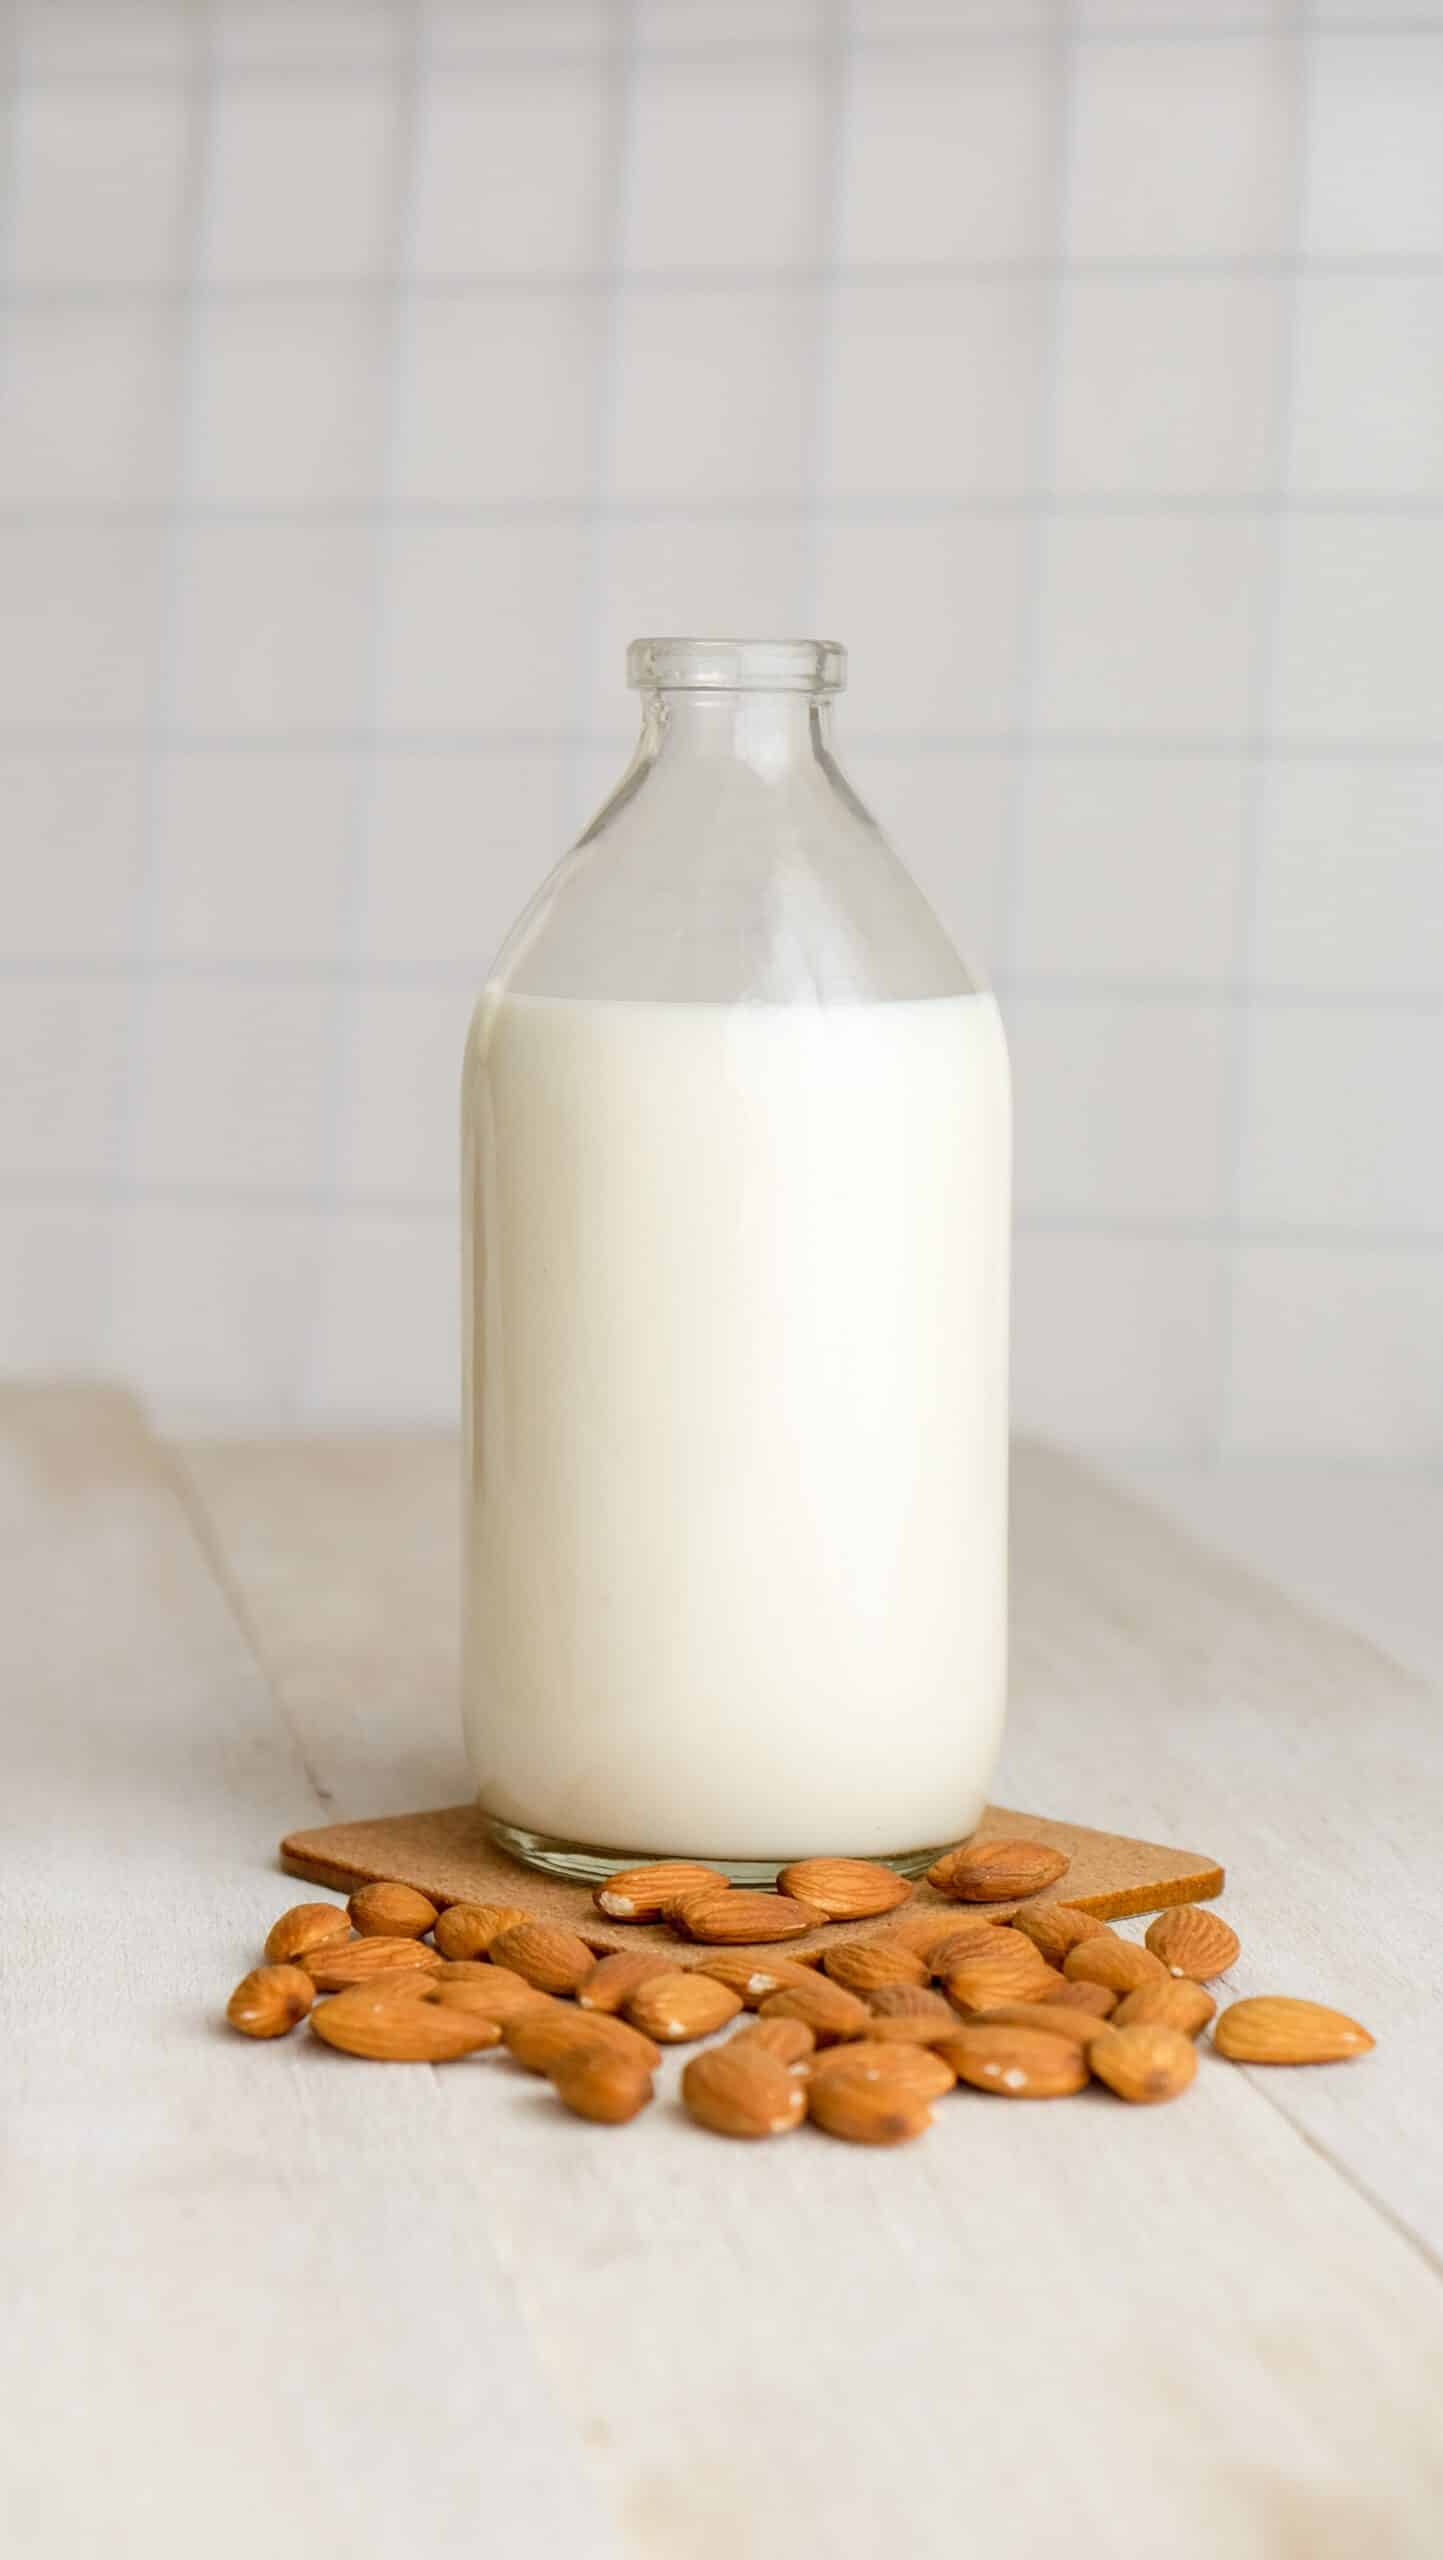 Almond milk (one cup)